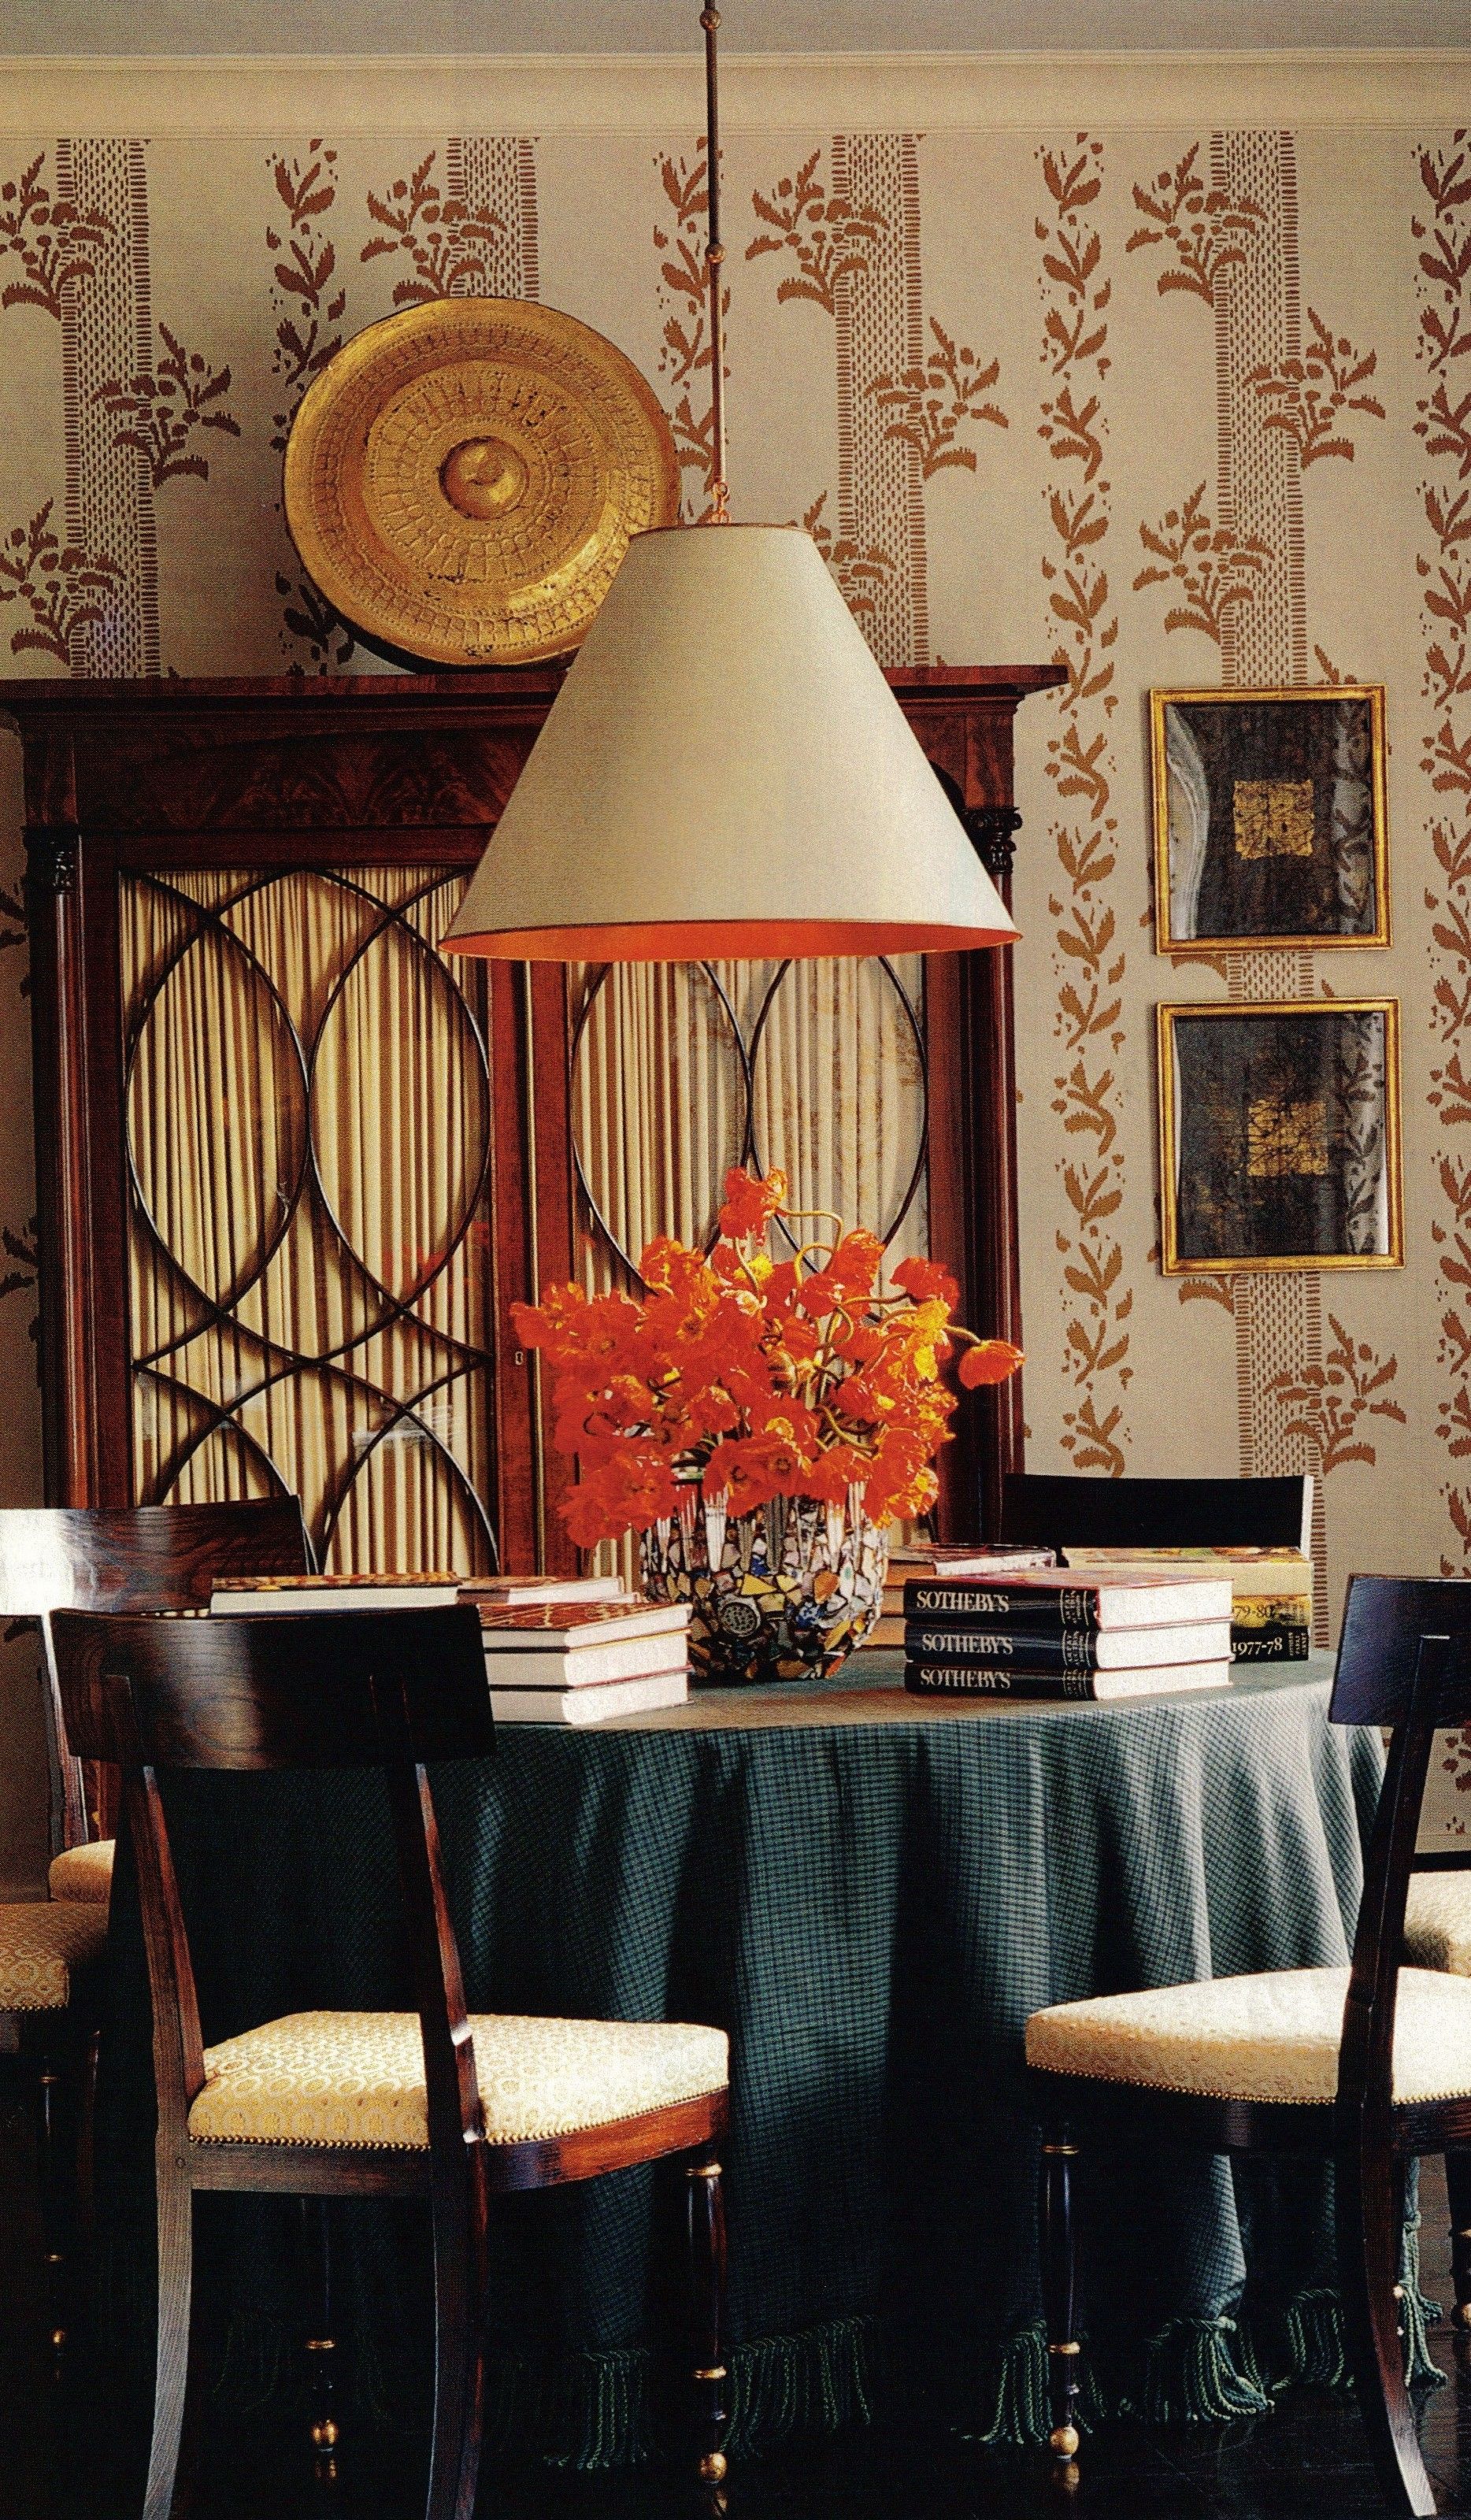 A dining room by Albert Hadley. It has a light blue ceiling, a favourite Hadley hue for the upper plane. The American Empire mahogany armoire is topped by a Tibetan gong. Next to them are two works on paper by Connecticut artist Mark Sciarillo, also a metalworker, who made the sculpted bronze base of the living room's coffee table. The vellum lampshade, the Eyelet gold-on-ivory wallpaper, and the chairs are all Hadley's designs. Fernando Bengoechega photography. House Beautiful